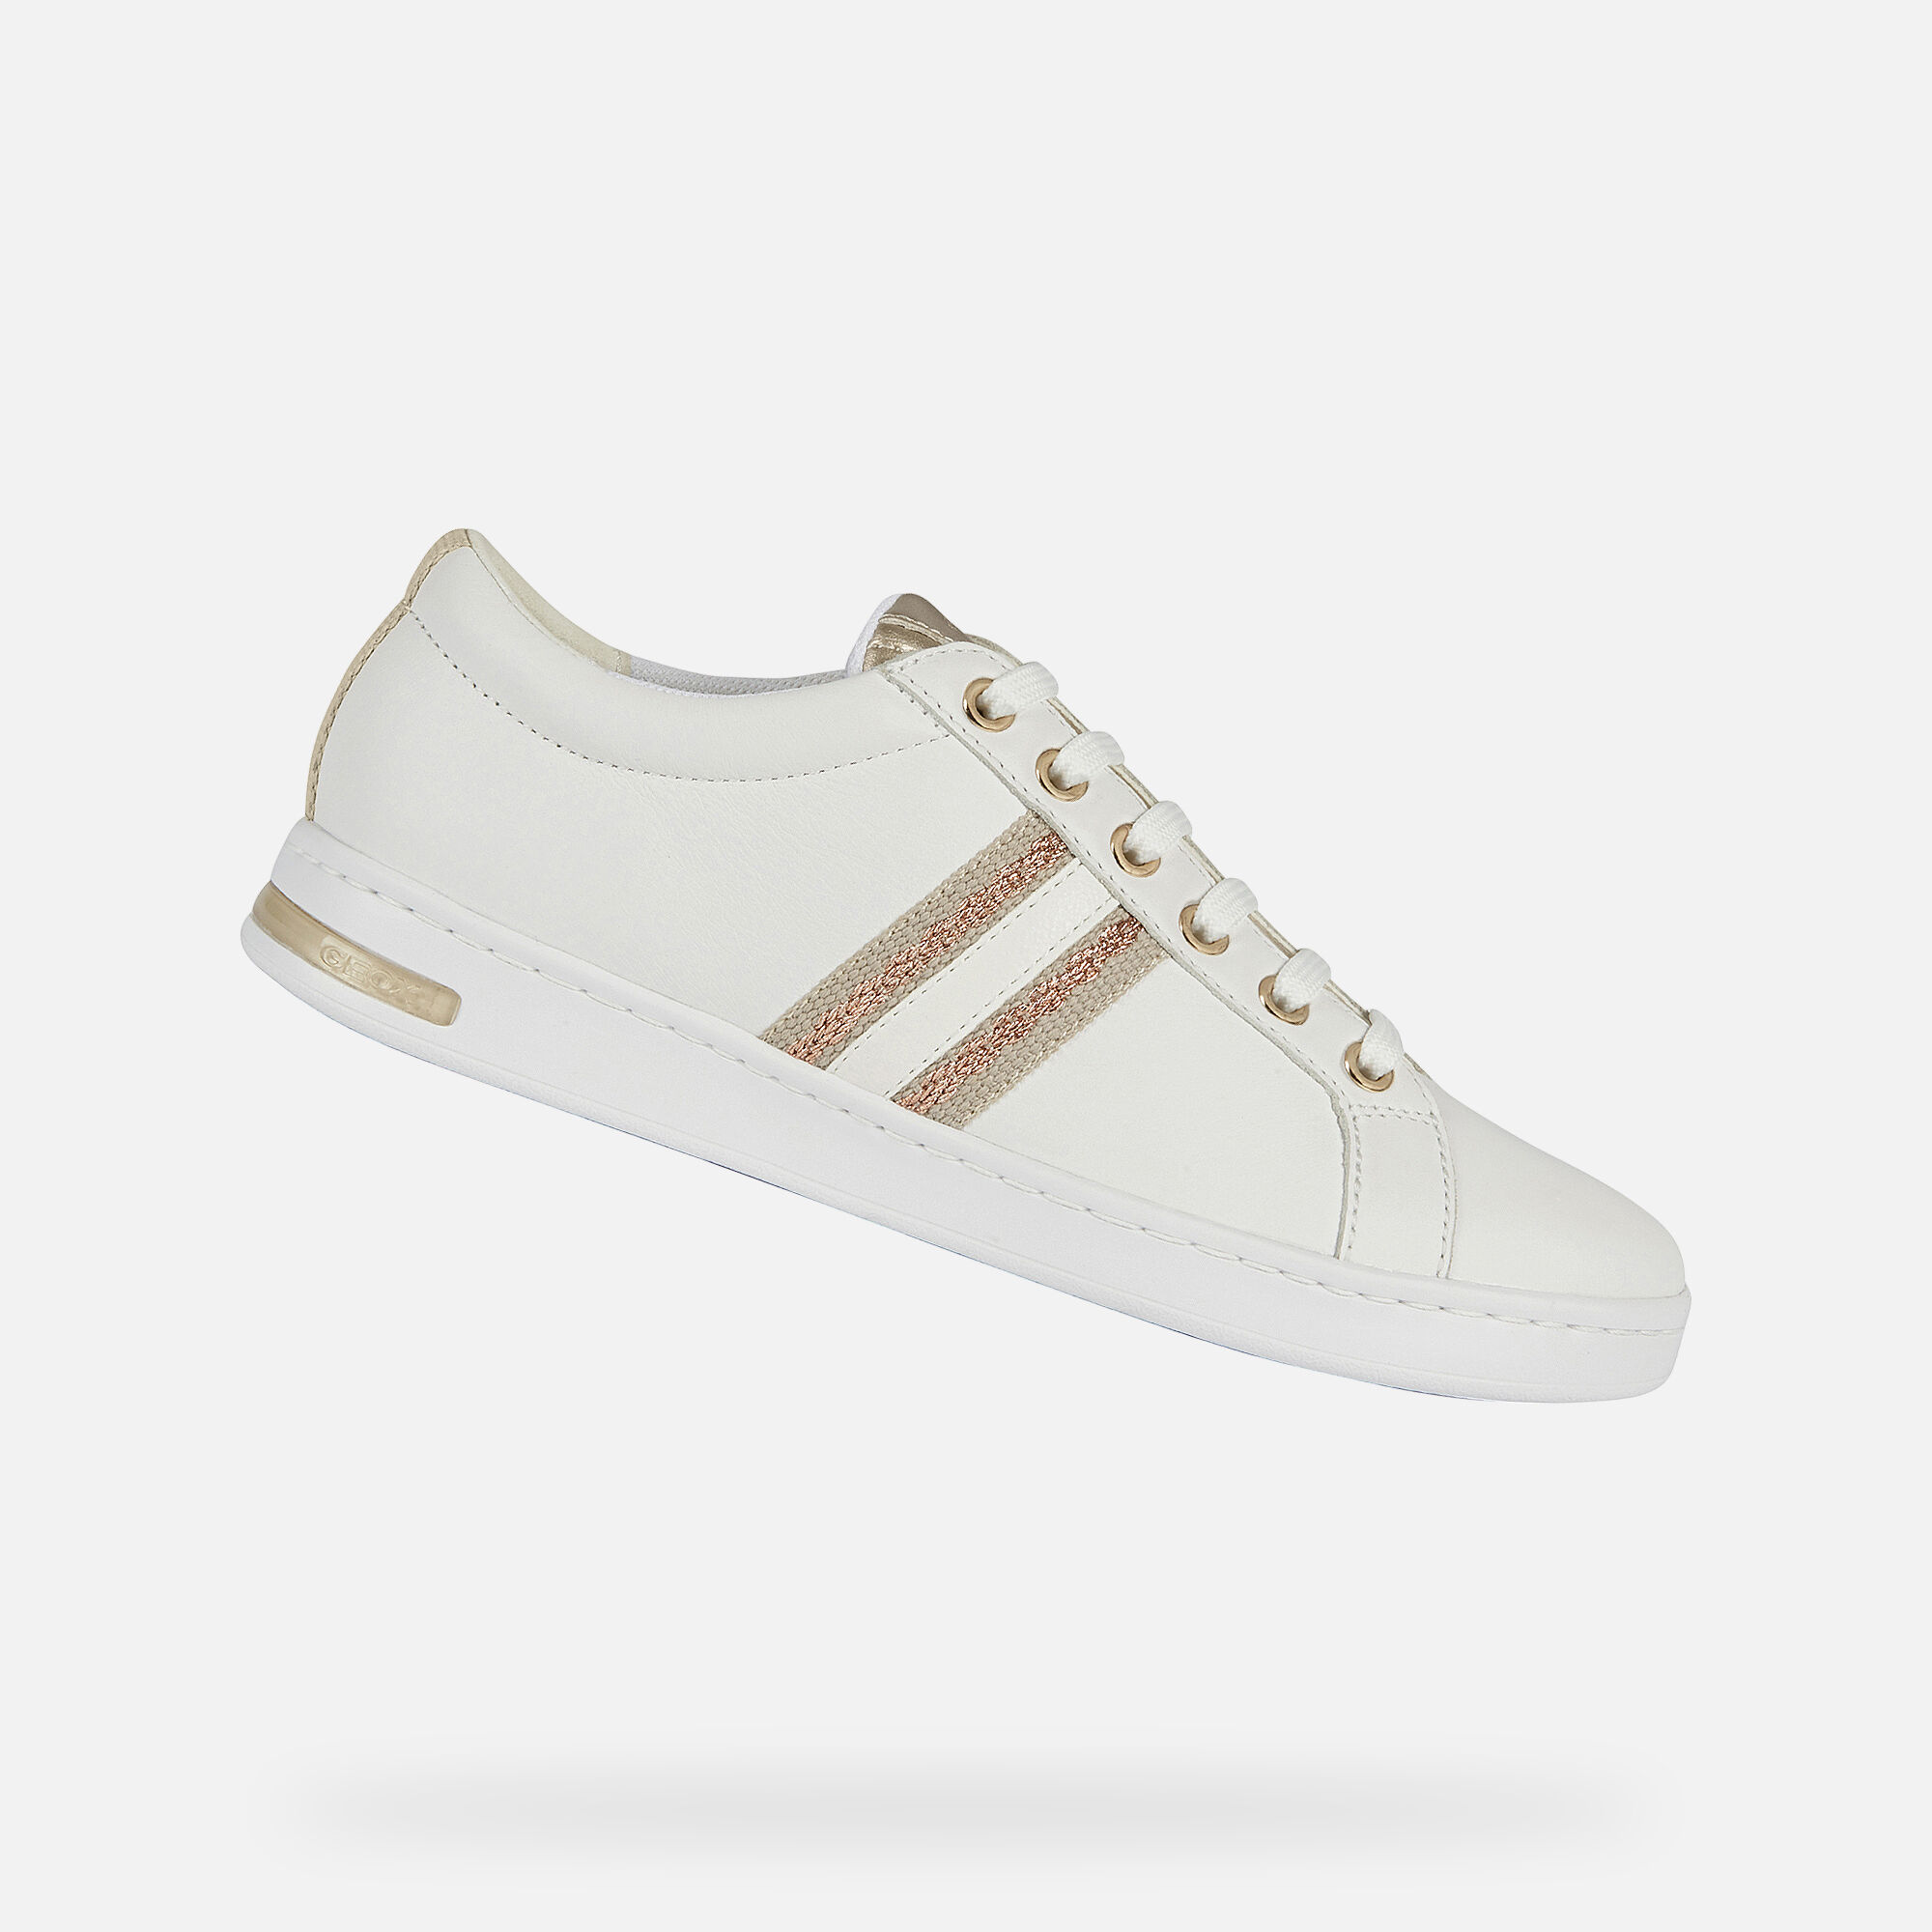 Geox JAYSEN Woman: White Sneakers | Geox ® Official Store